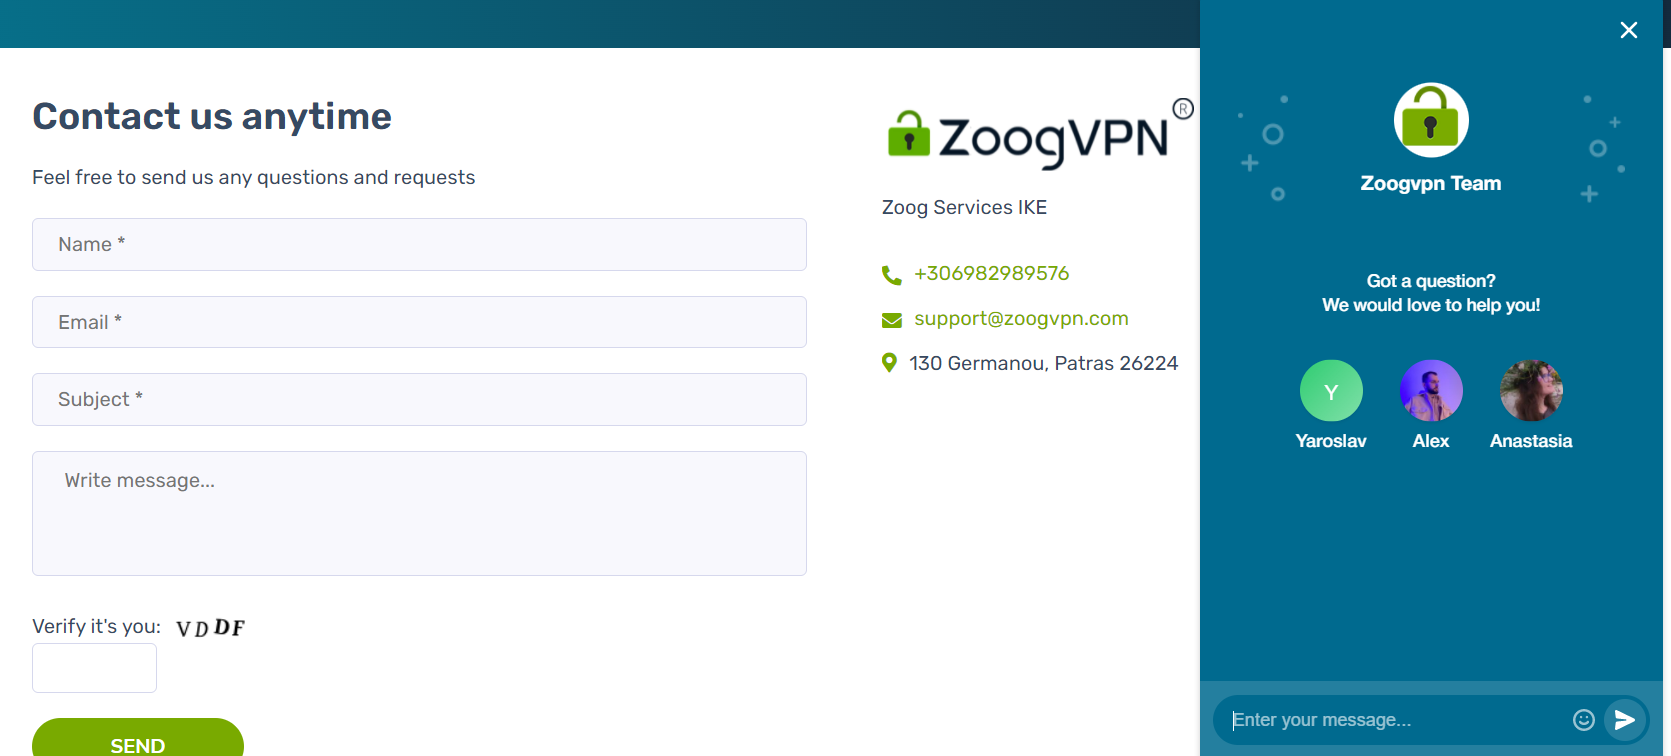 zoog-vpn-live-chat-support-in-Singapore